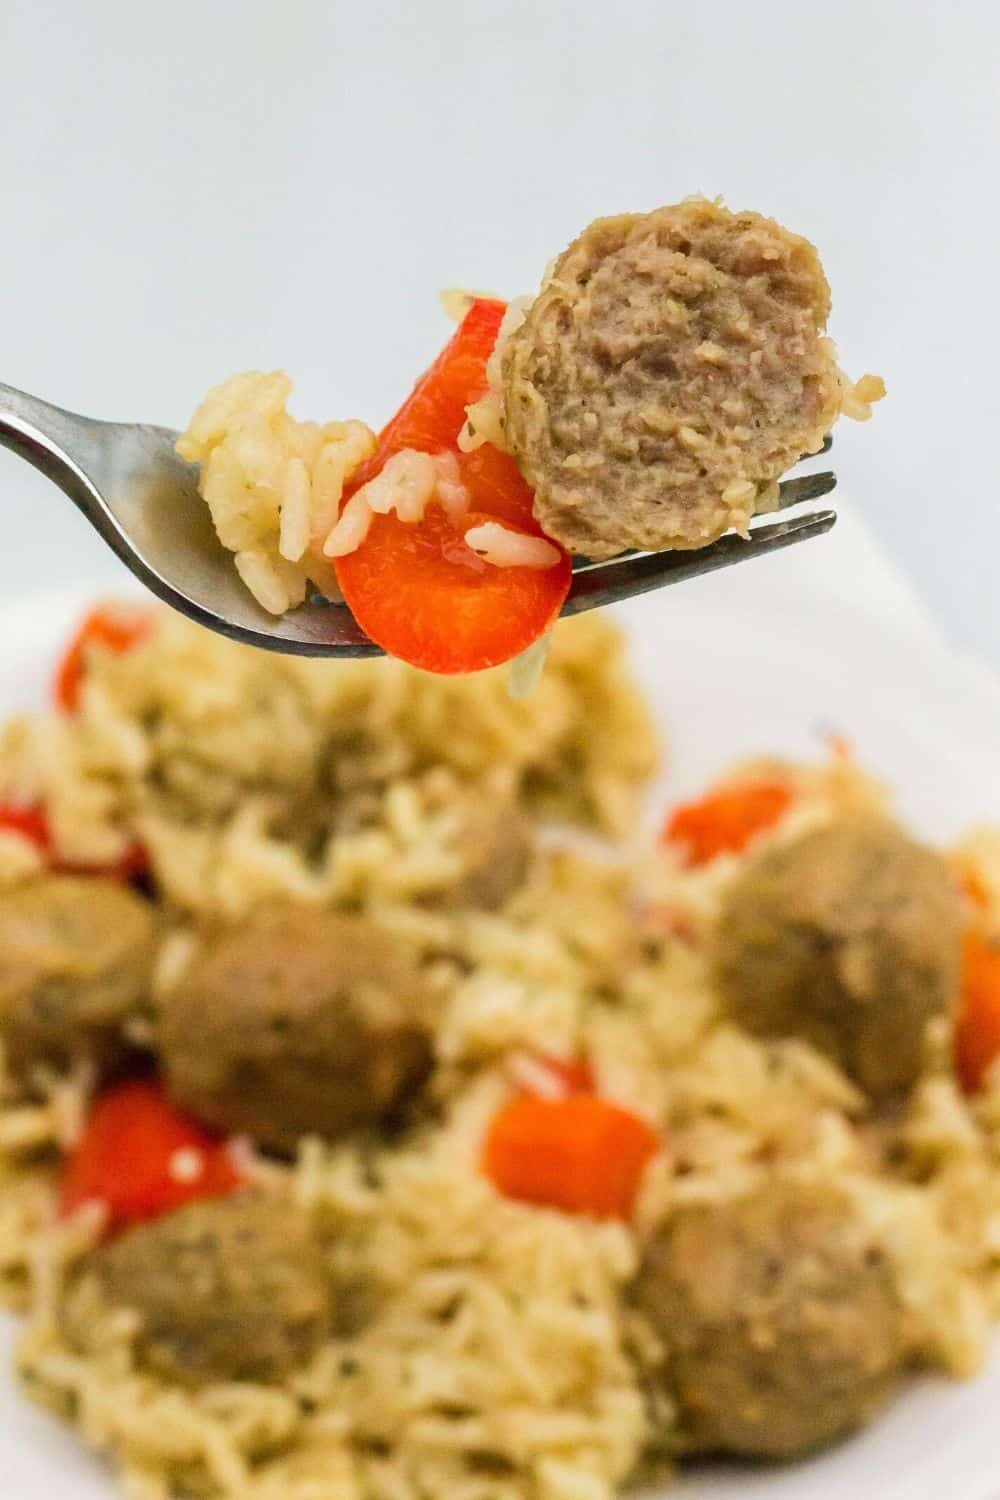 close-up view of a fork holding half a meatball, a pepper, and some rice above the plate of meatballs and rice cooked in the pressure cooker